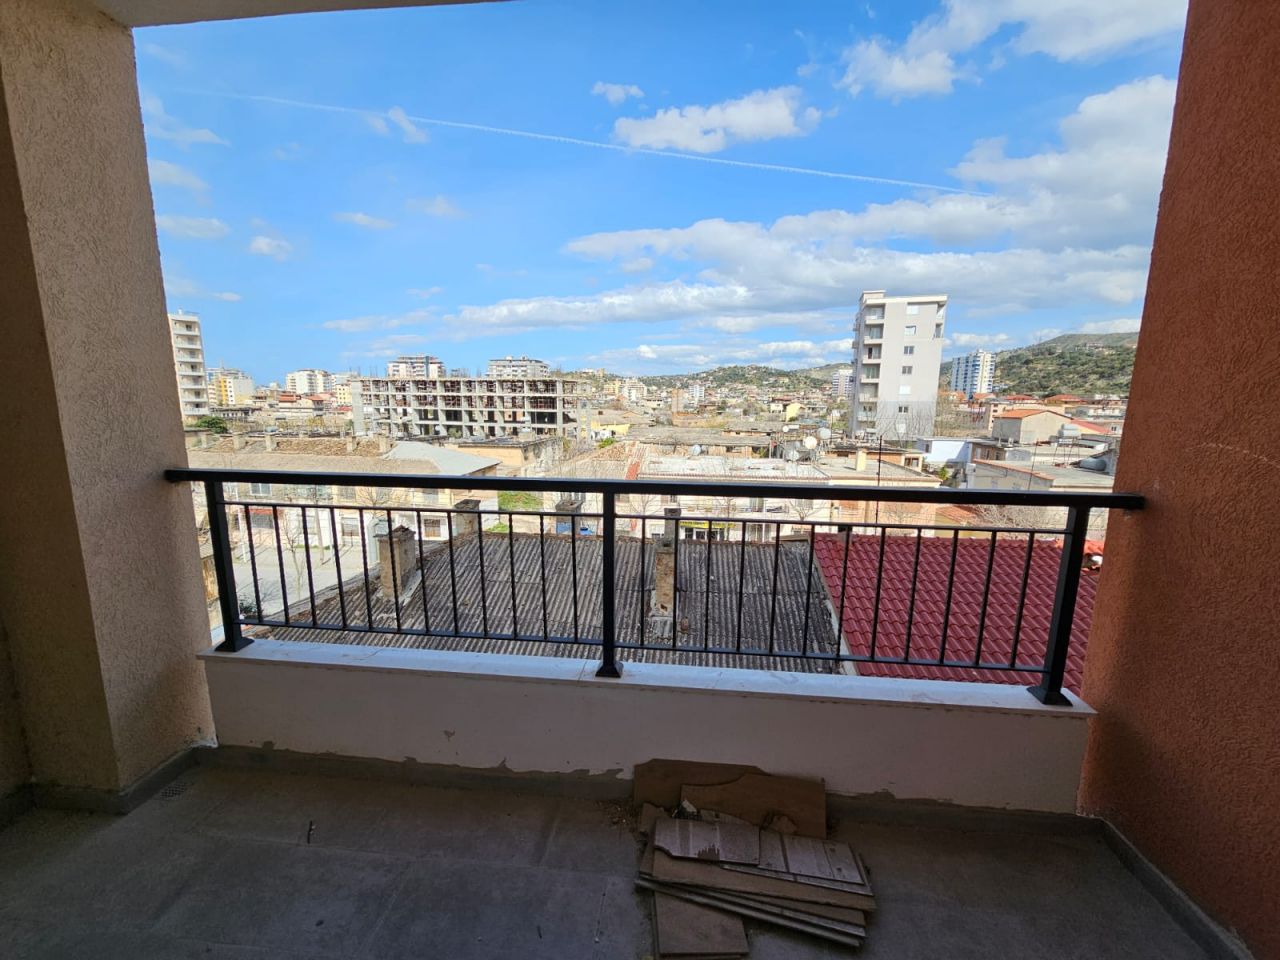 Apartment For Sale In Vlora Albania, Located In A Good Area, Close To The Beach